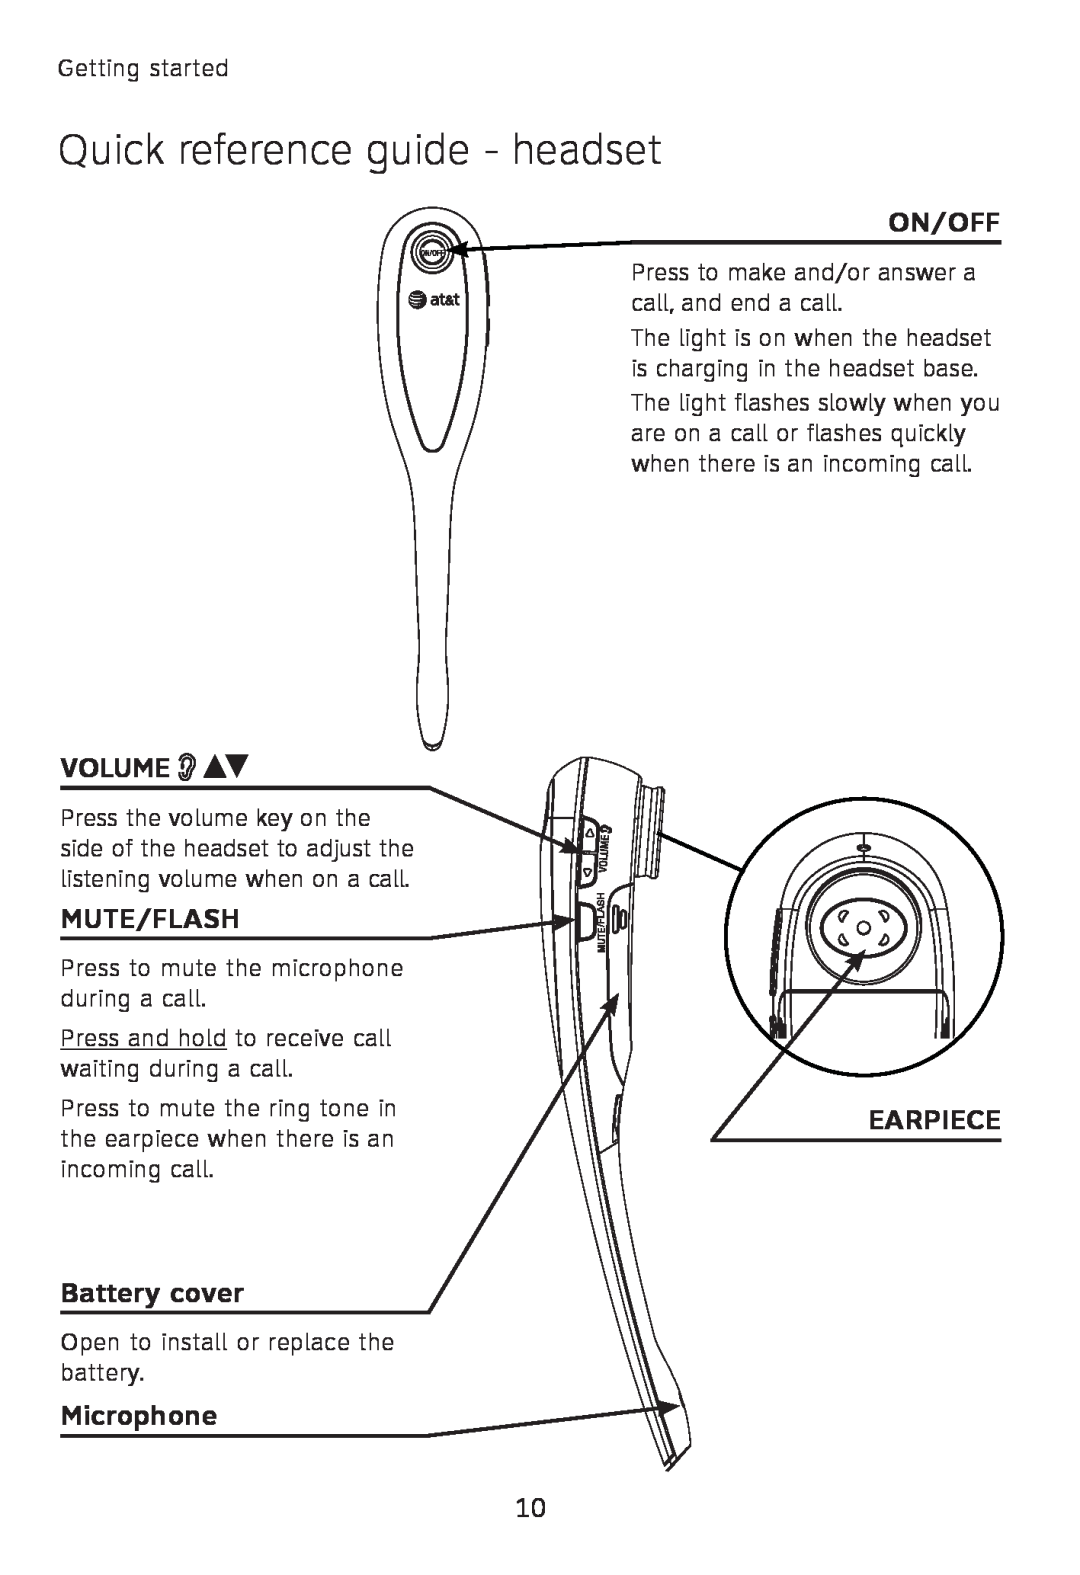 AT&T TL760 quick start Quick reference guide - headset, On/Off, Volume, Mute/Flash, Battery cover, Microphone, Earpiece 